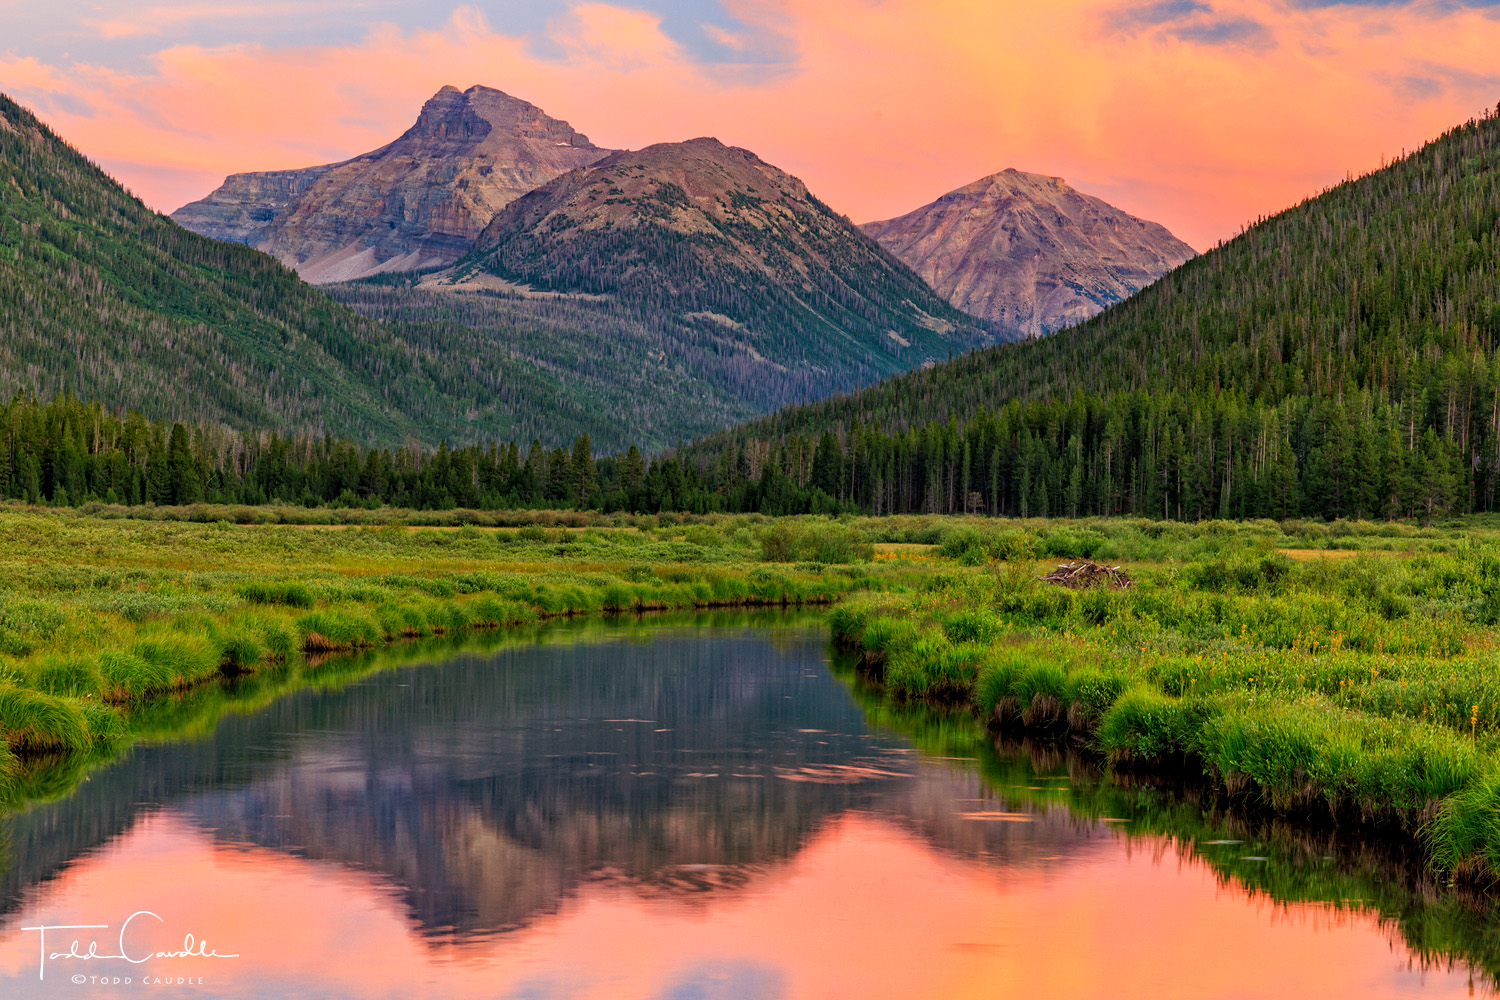 Dramatic sunset colors alight over Ostler Peak and Spread Eagle Peak in the Uinta Mountains, all reflected in a calm meander...